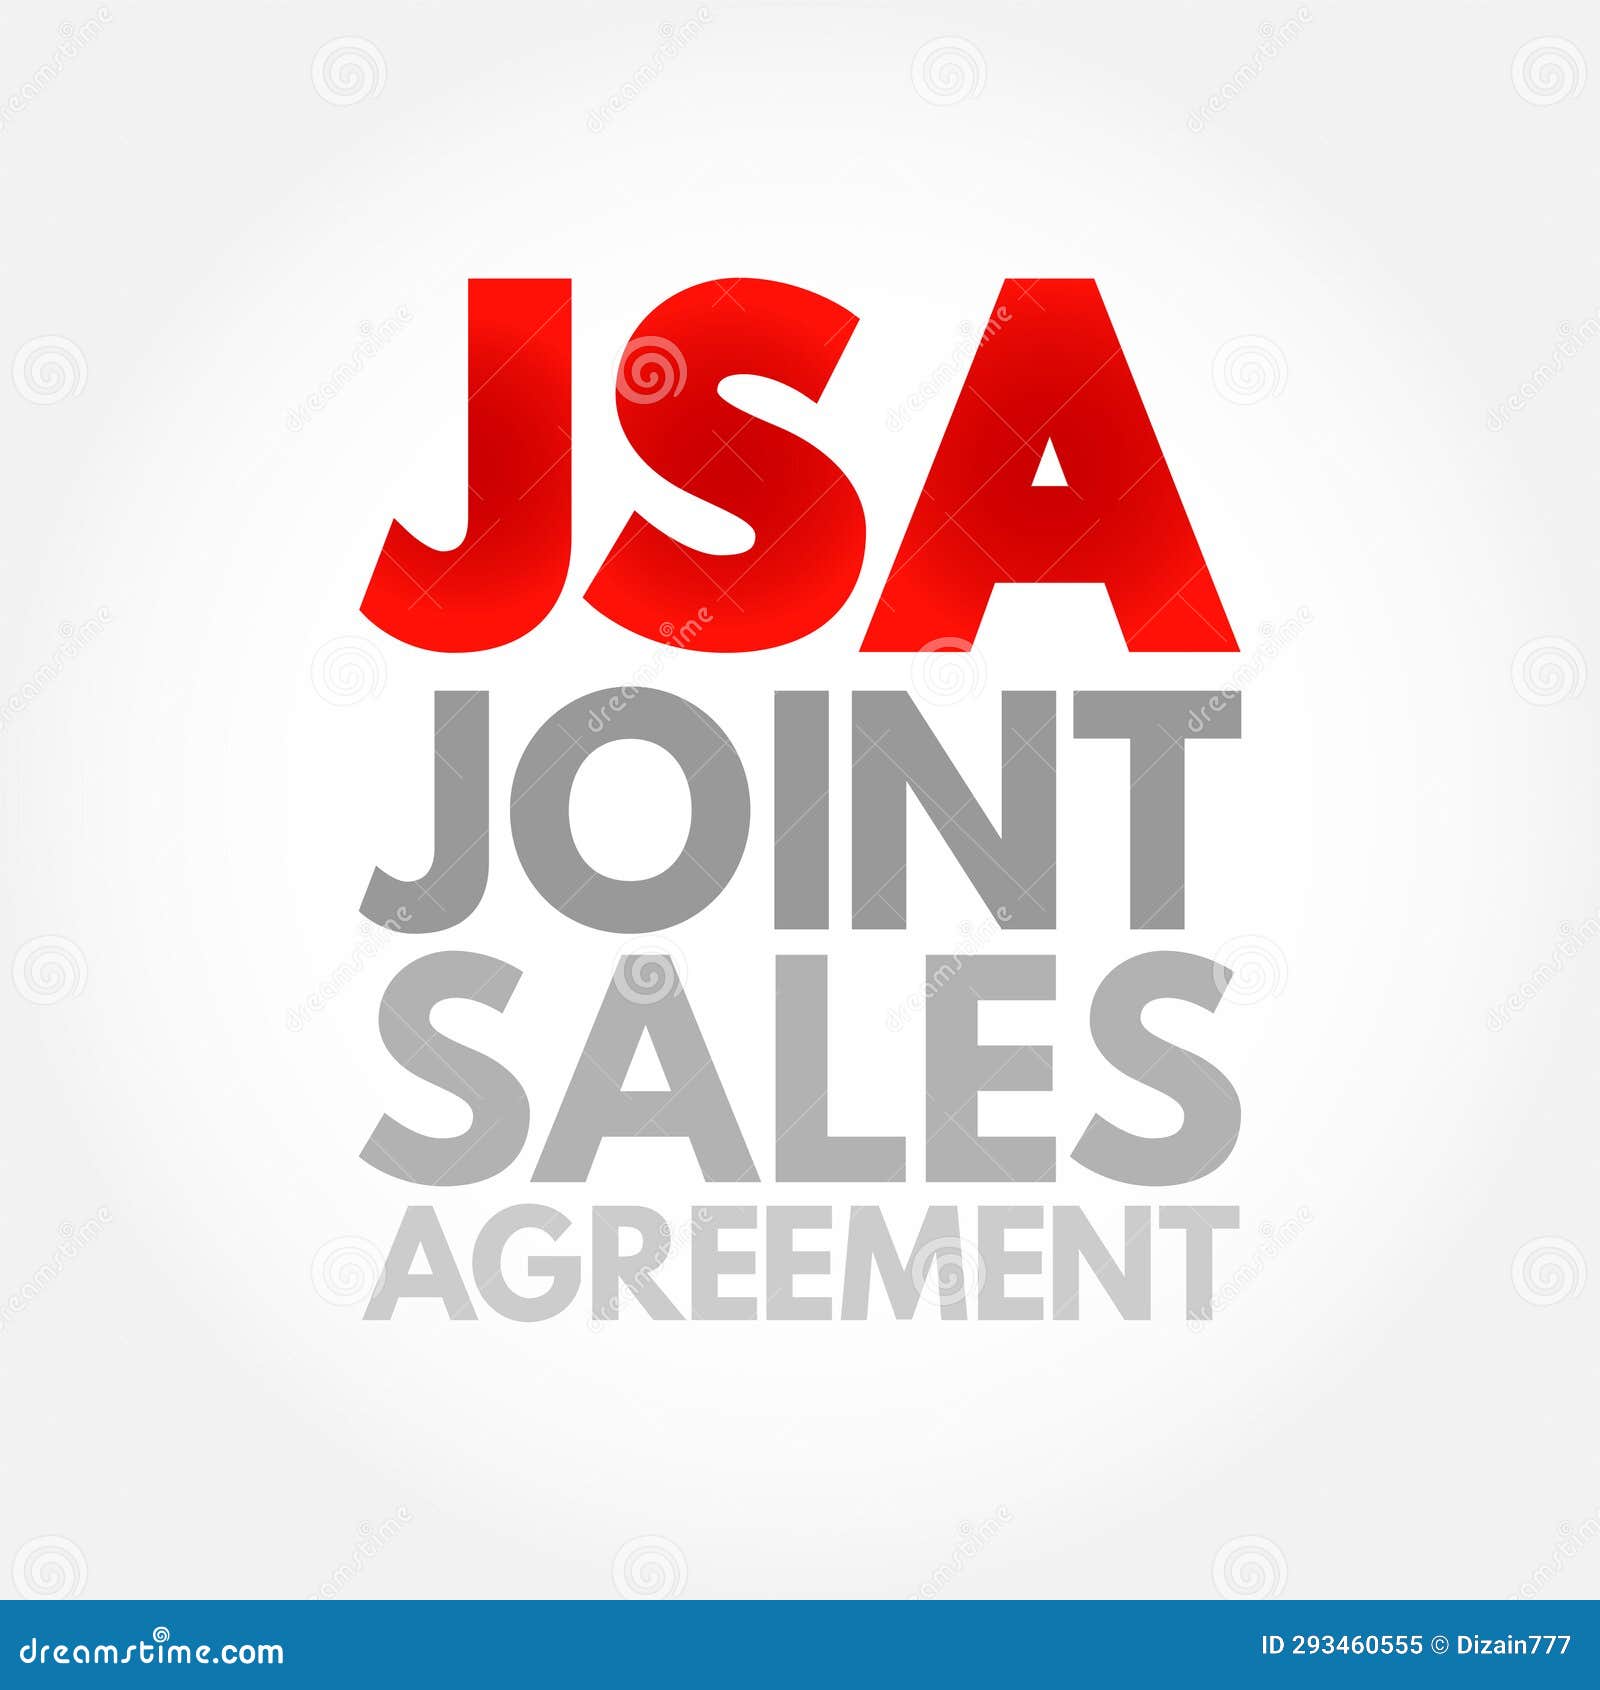 jsa - joint sales agreement is an agreement authorizing a broker to sell advertising time for the brokered station in return for a